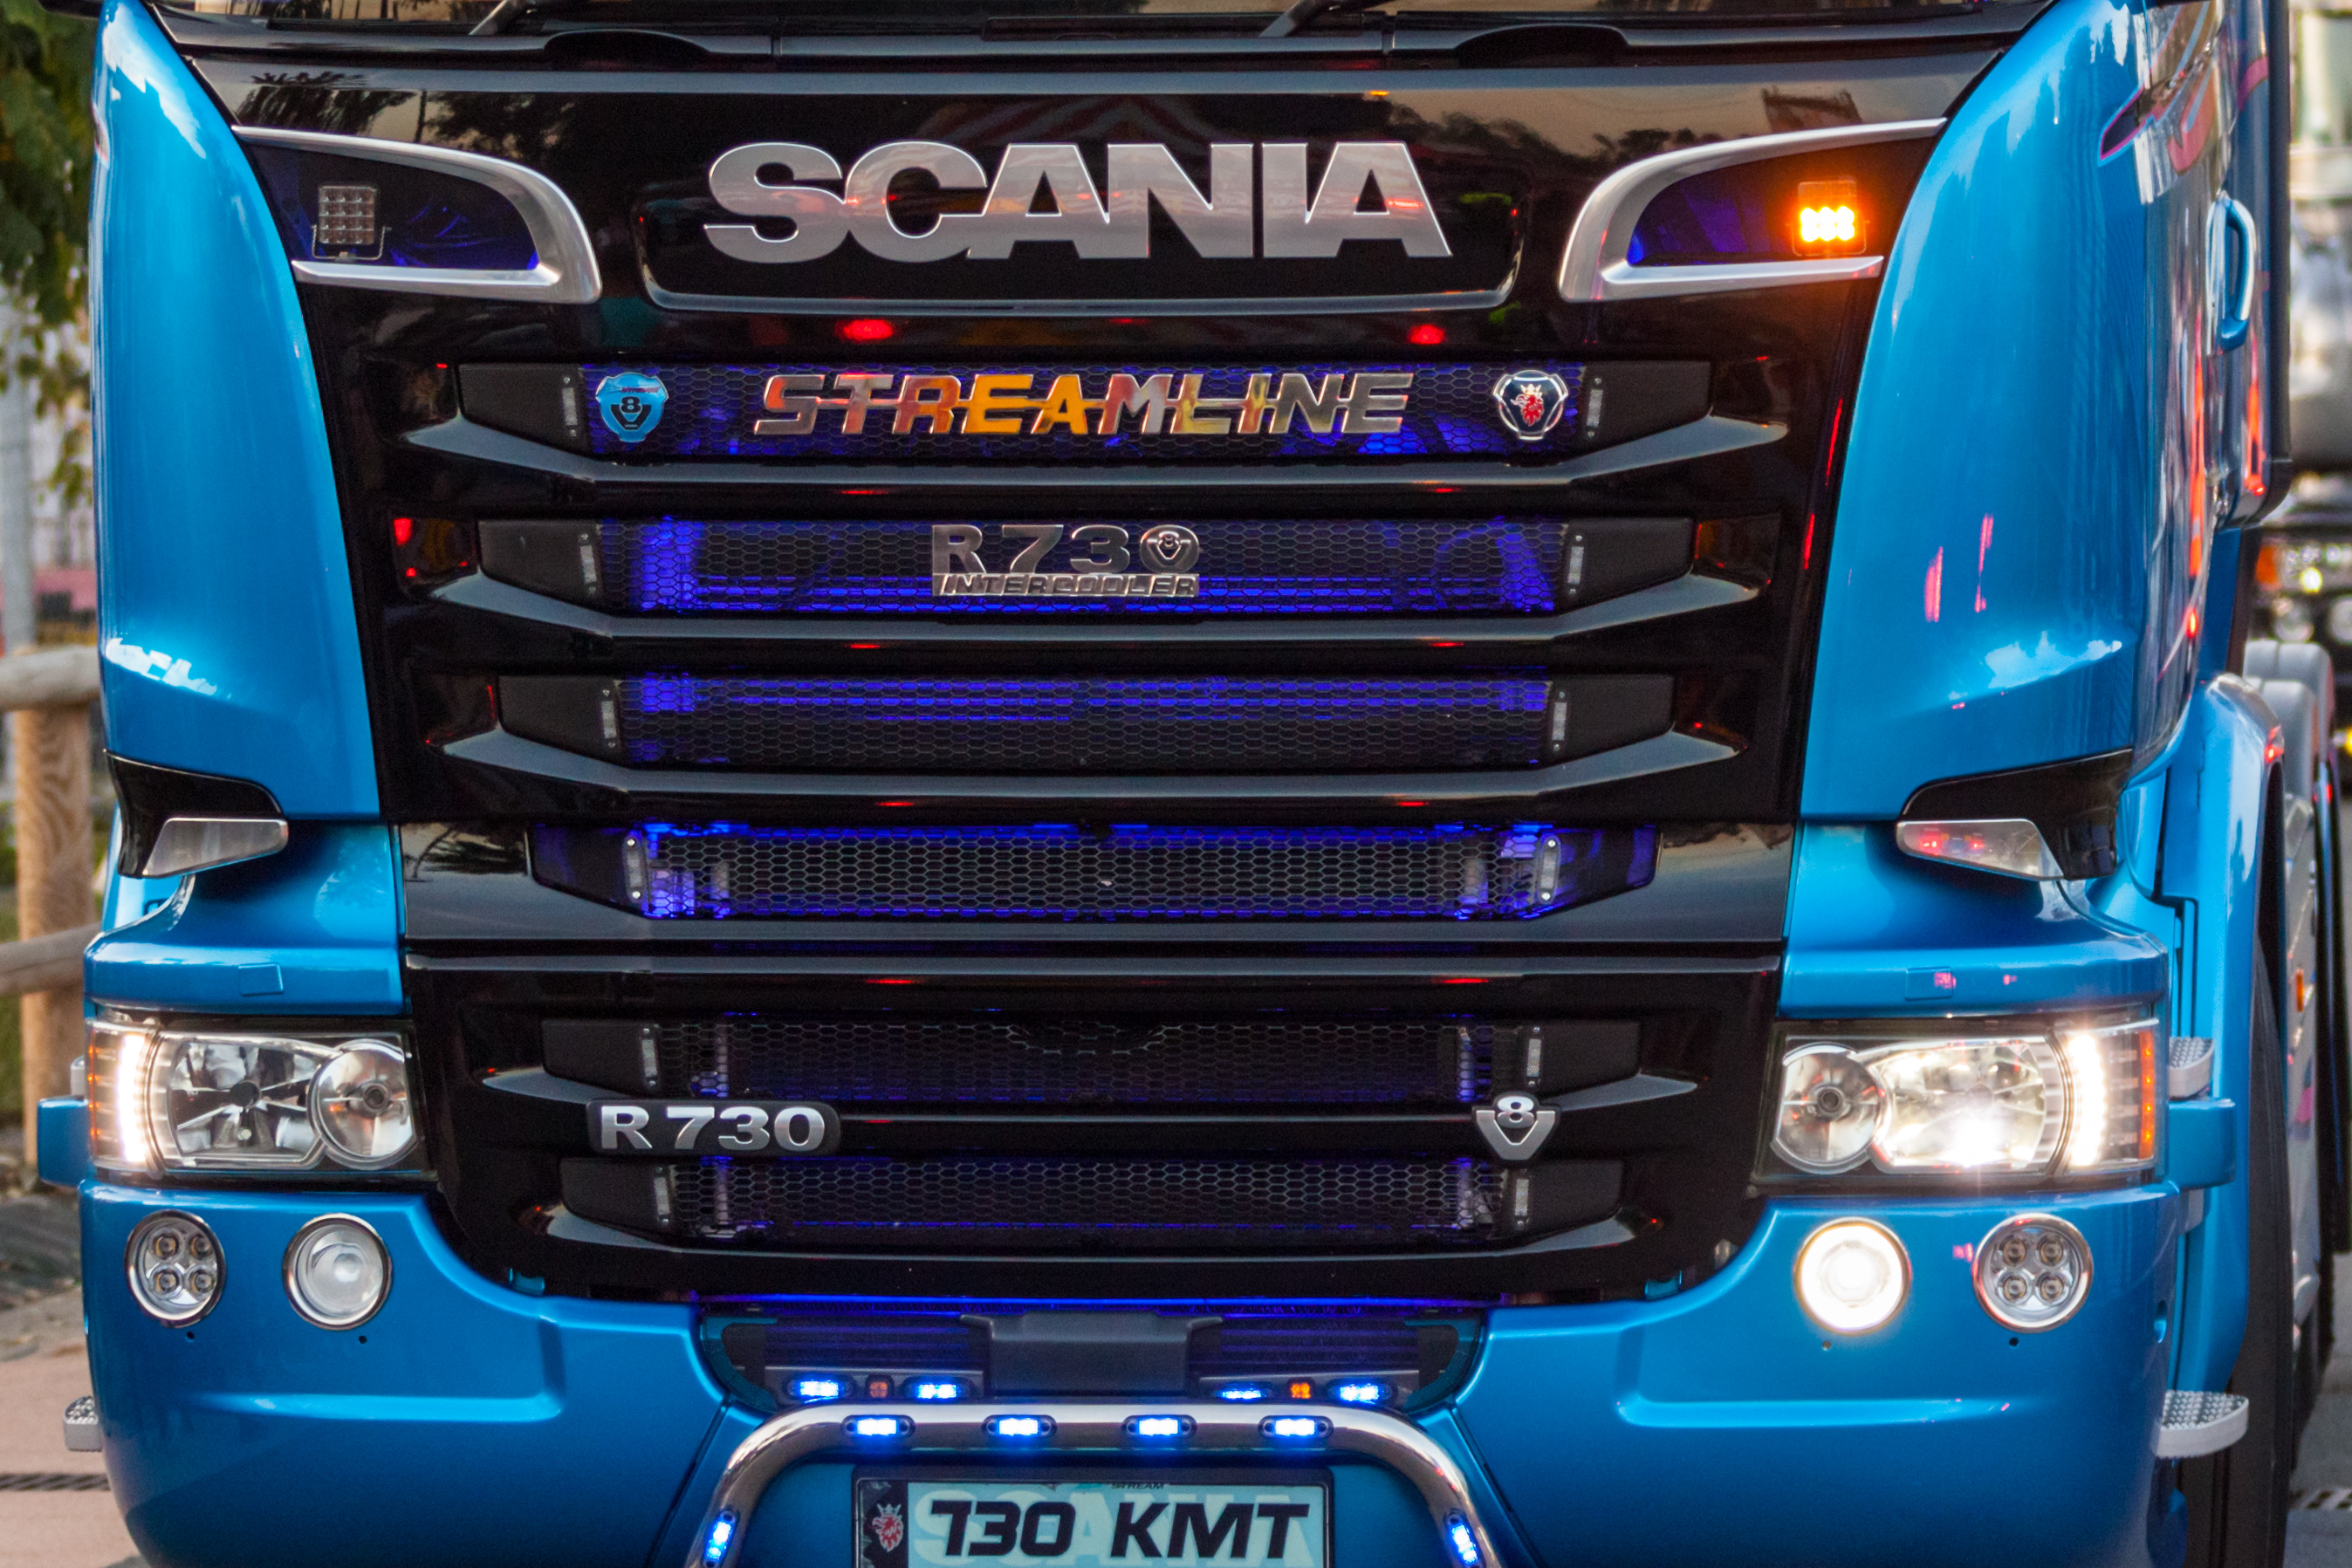 Scania Trucks Picture, Old .truck Picture Free.com